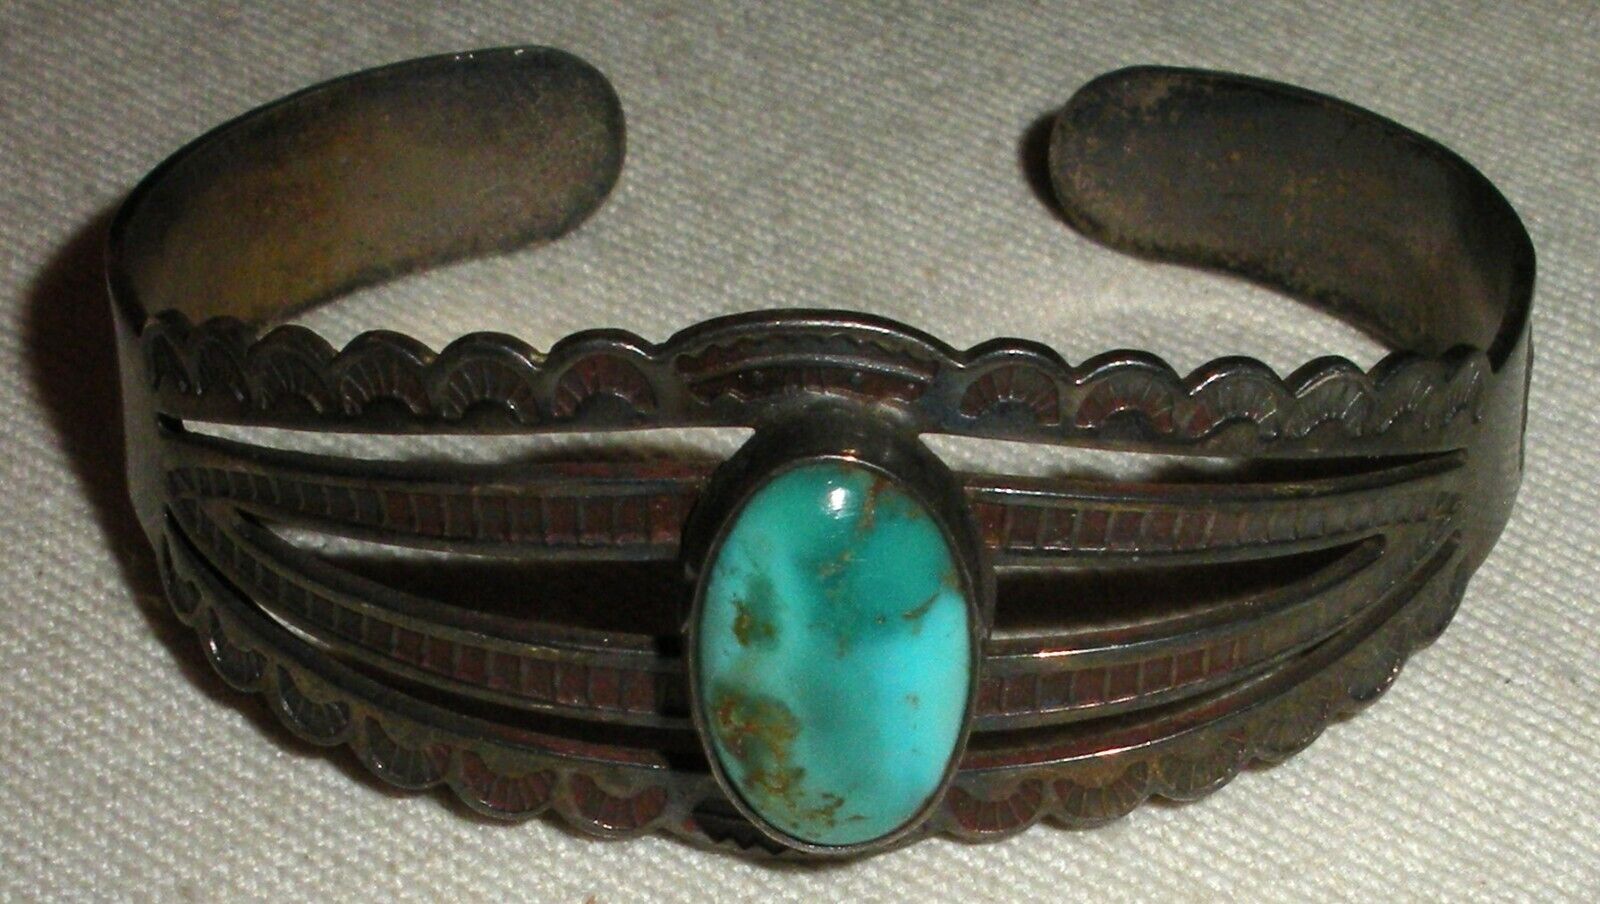 ANTIQUE NAVAJO TURQUOISE EARLY ARROW STAMPS STERLING SILVER BRACELET vafo